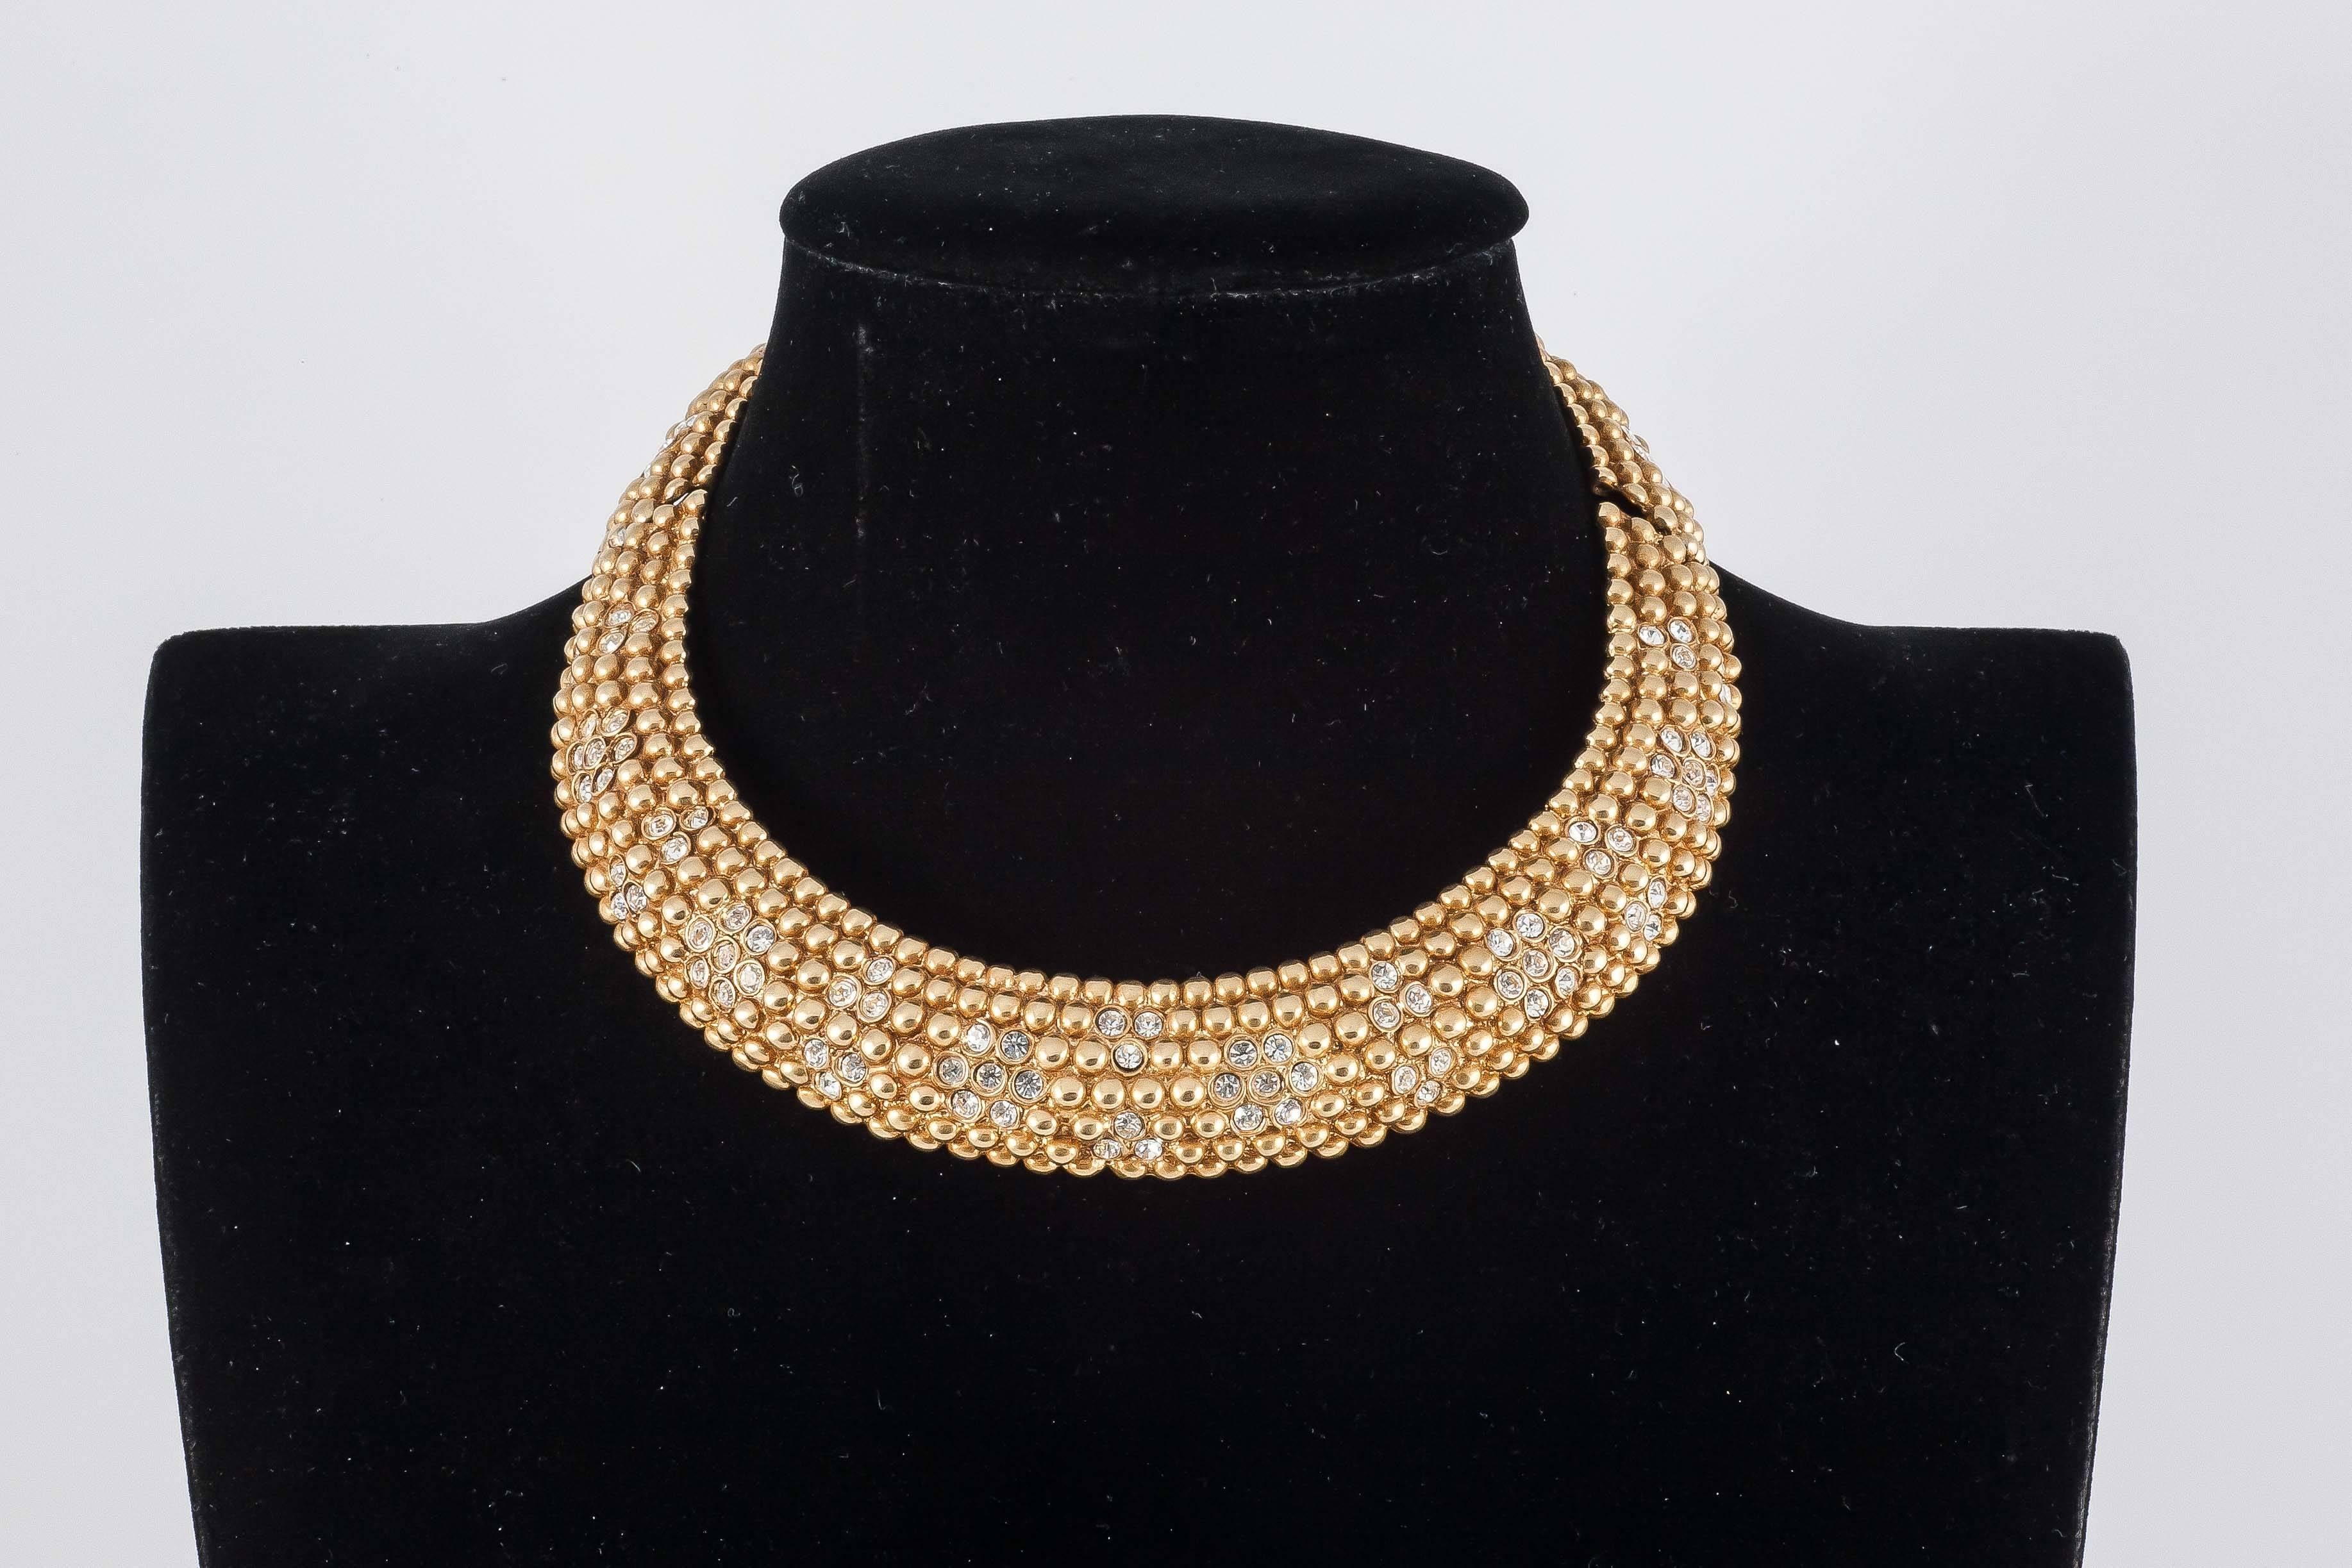 Gilt bobbles with paste floral highlights make up this gently curving rigid collar. Beautifully made this is a  smart classic 1980s standard from YSL. 
Yves Saint Laurent was born in 1936, and became one of the 20th Century’s most famous and